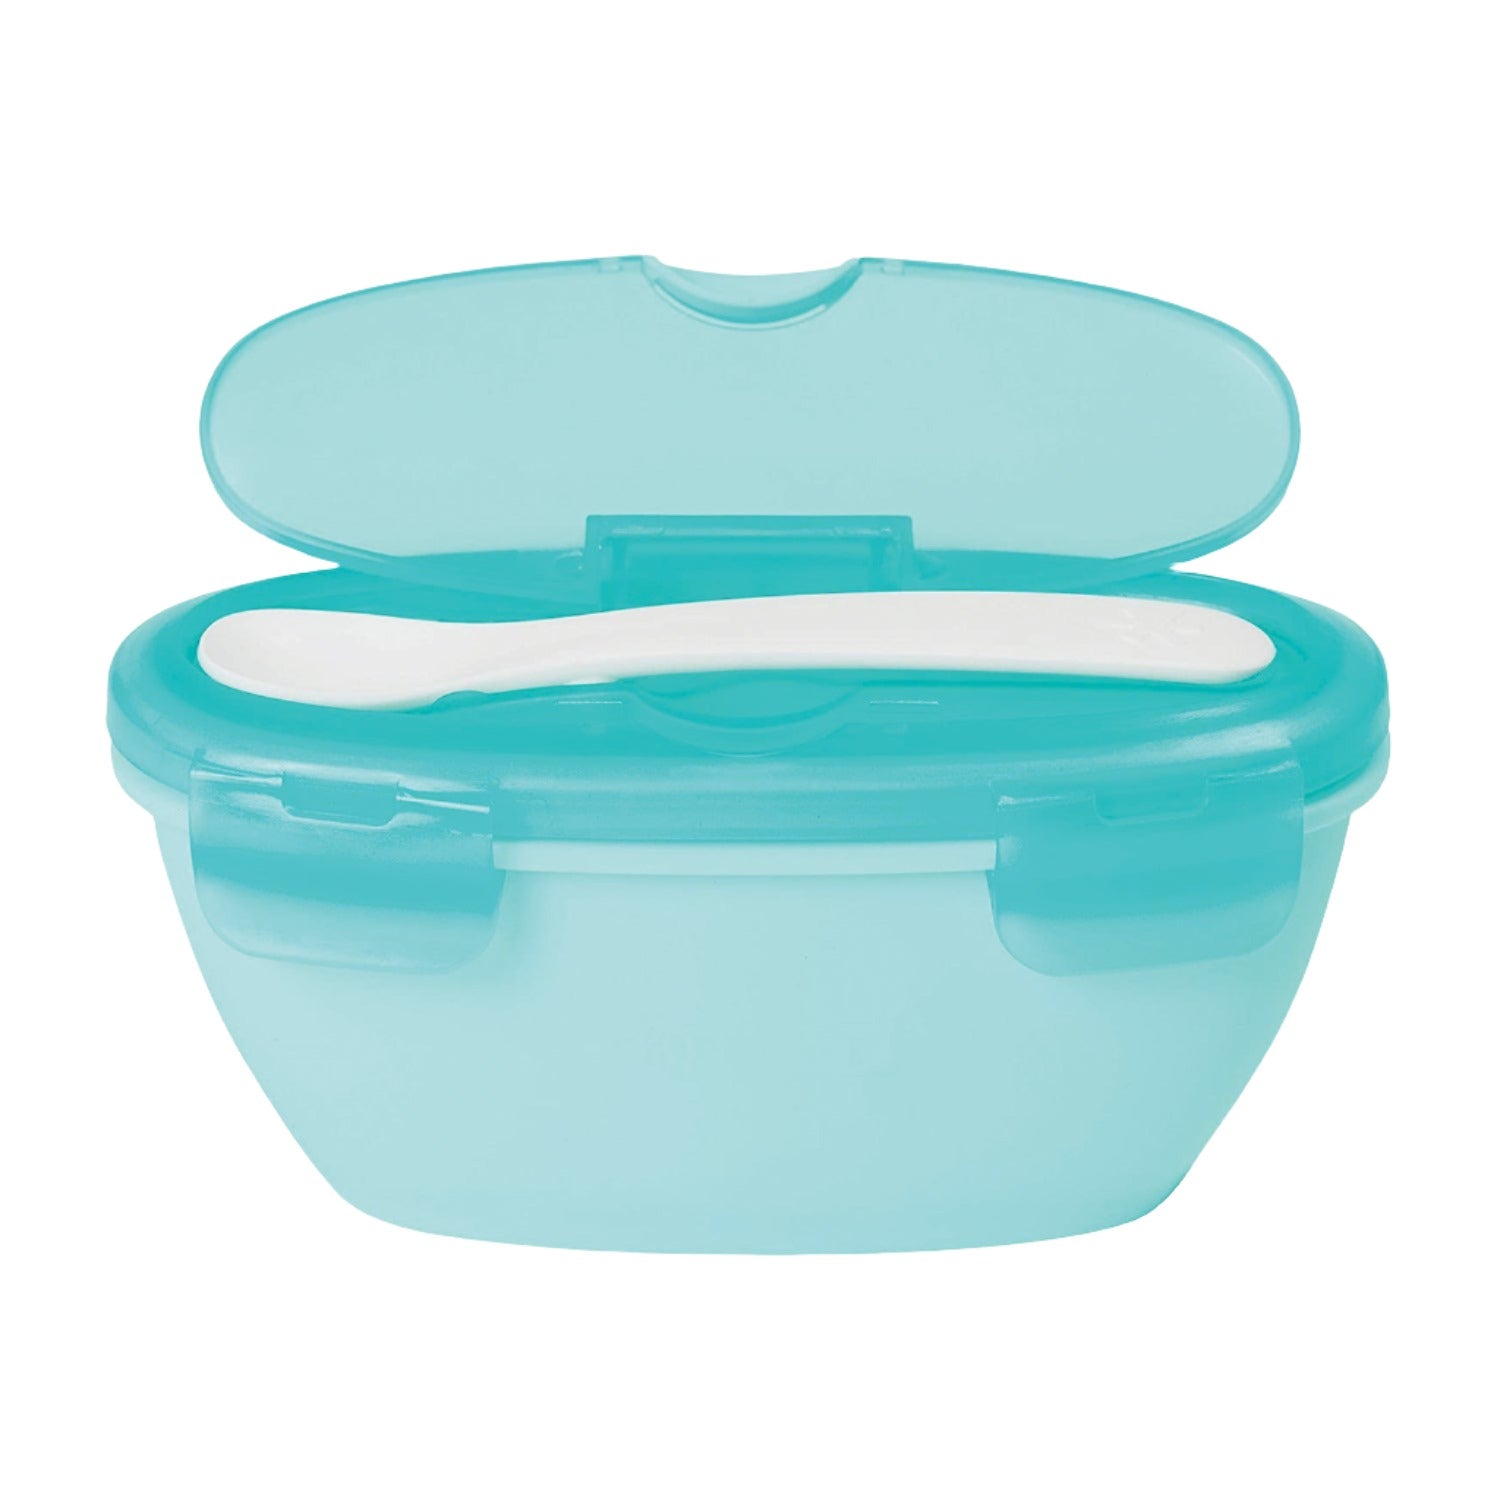 An image of Baby Travel Bowl and Spoon - Skip Hop Easy-Serve Travel Bowl & Spoon | Small Sma...